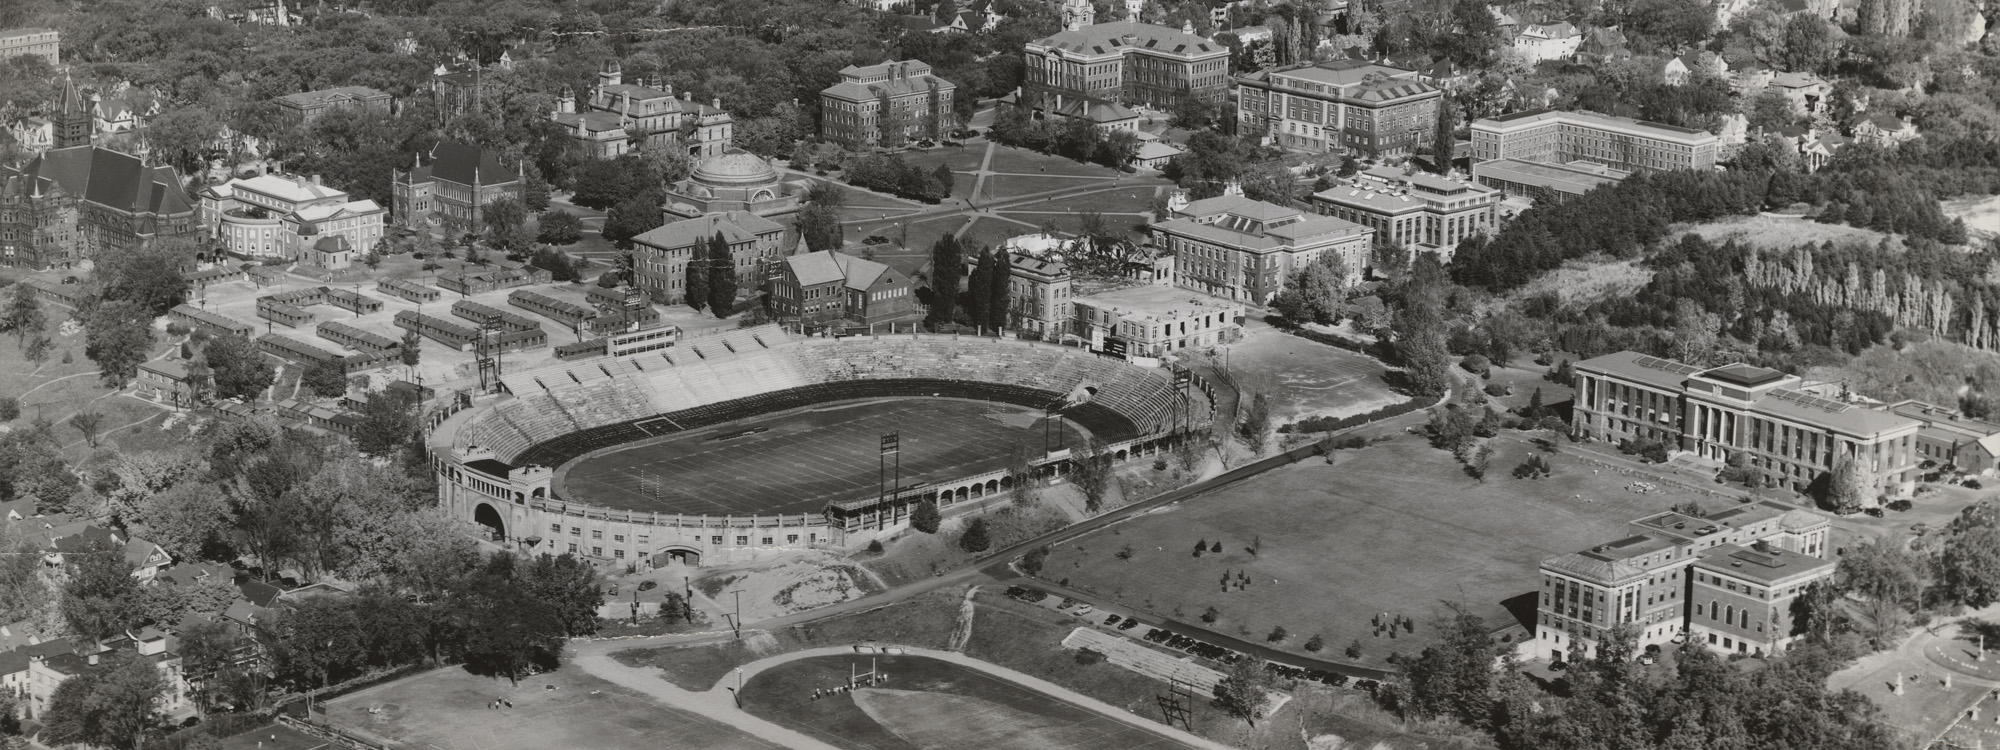 Detail from aerial photograph of Syracuse University’s main campus, between 1947 and 1949.